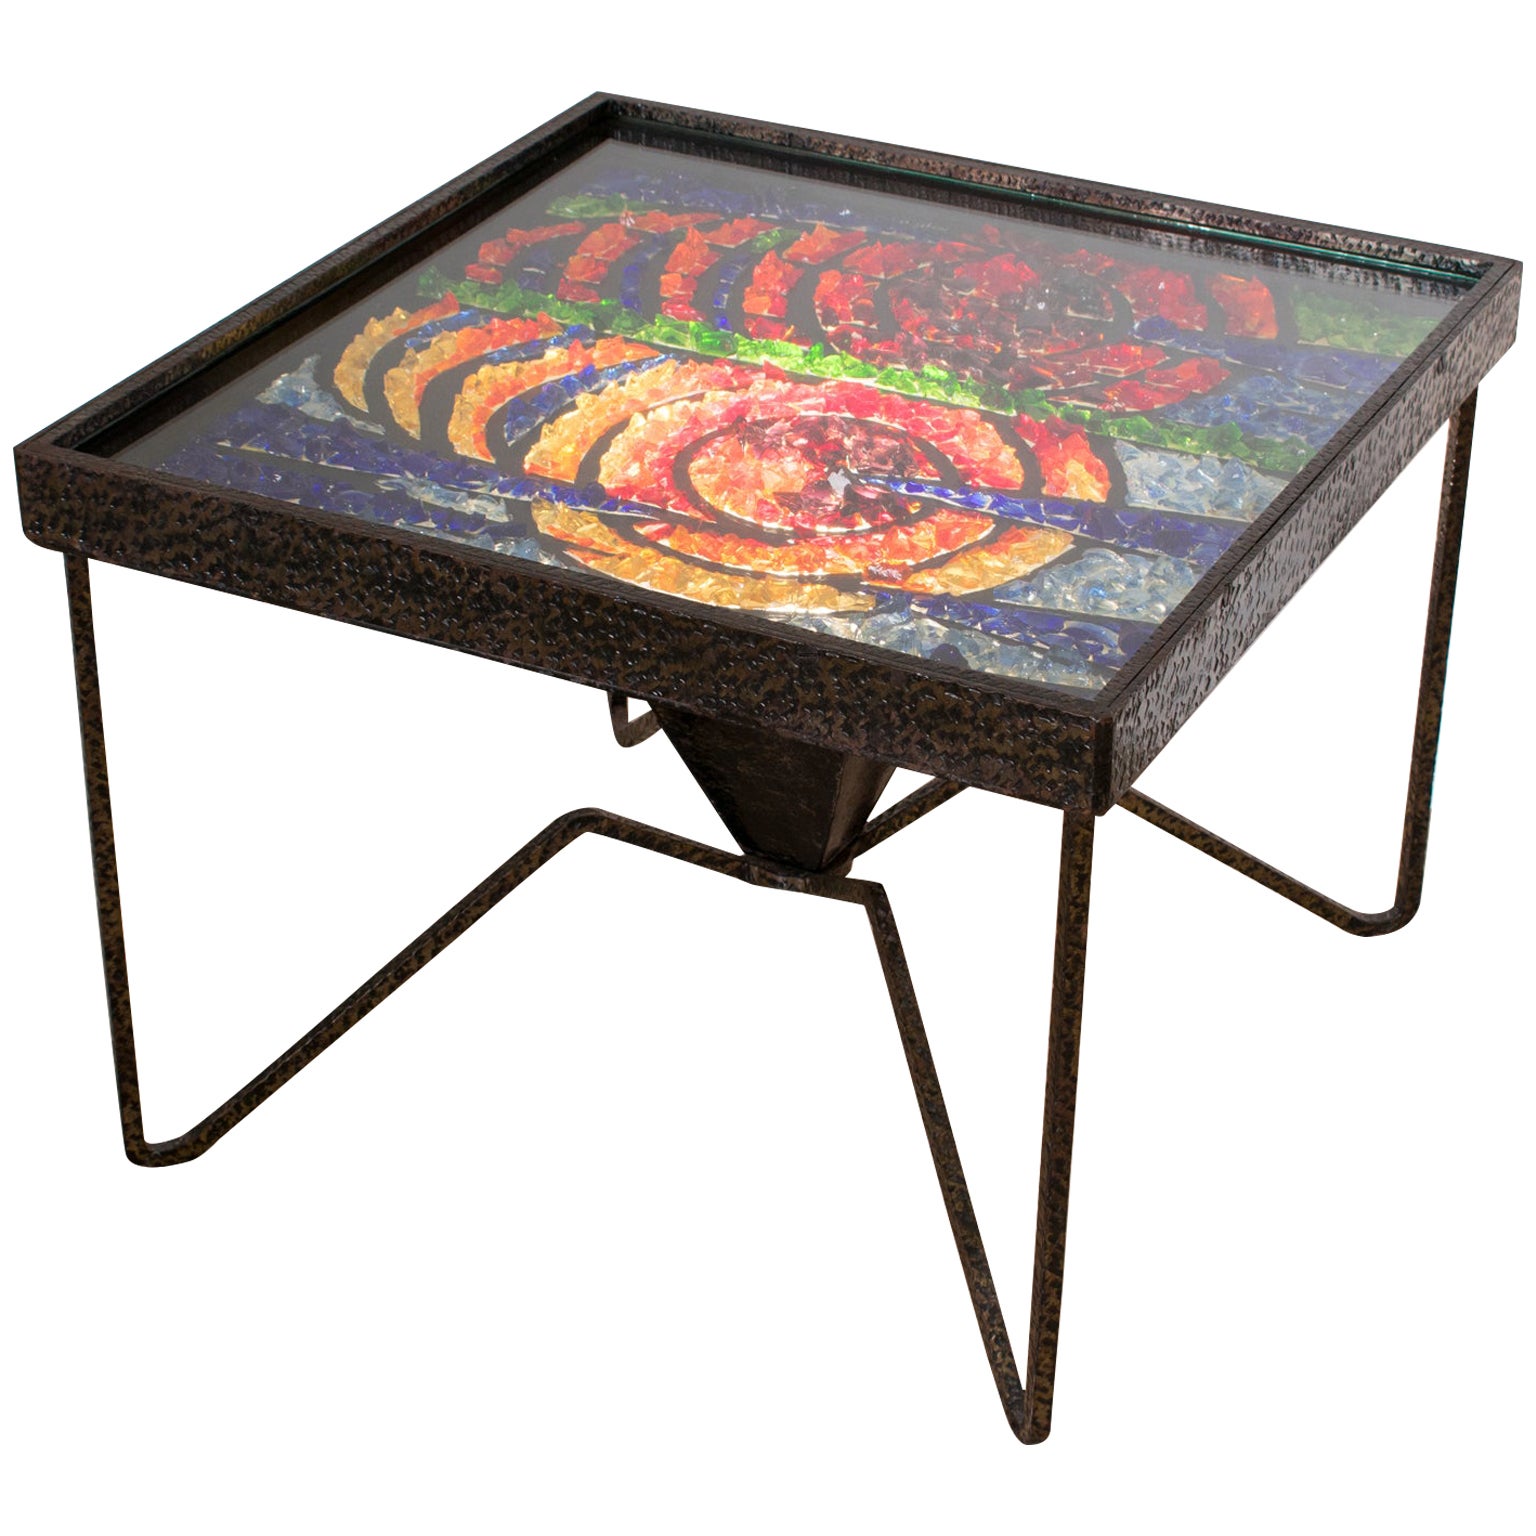 1960s French Wrought Iron Side Coffee Table with Glass Mosaic